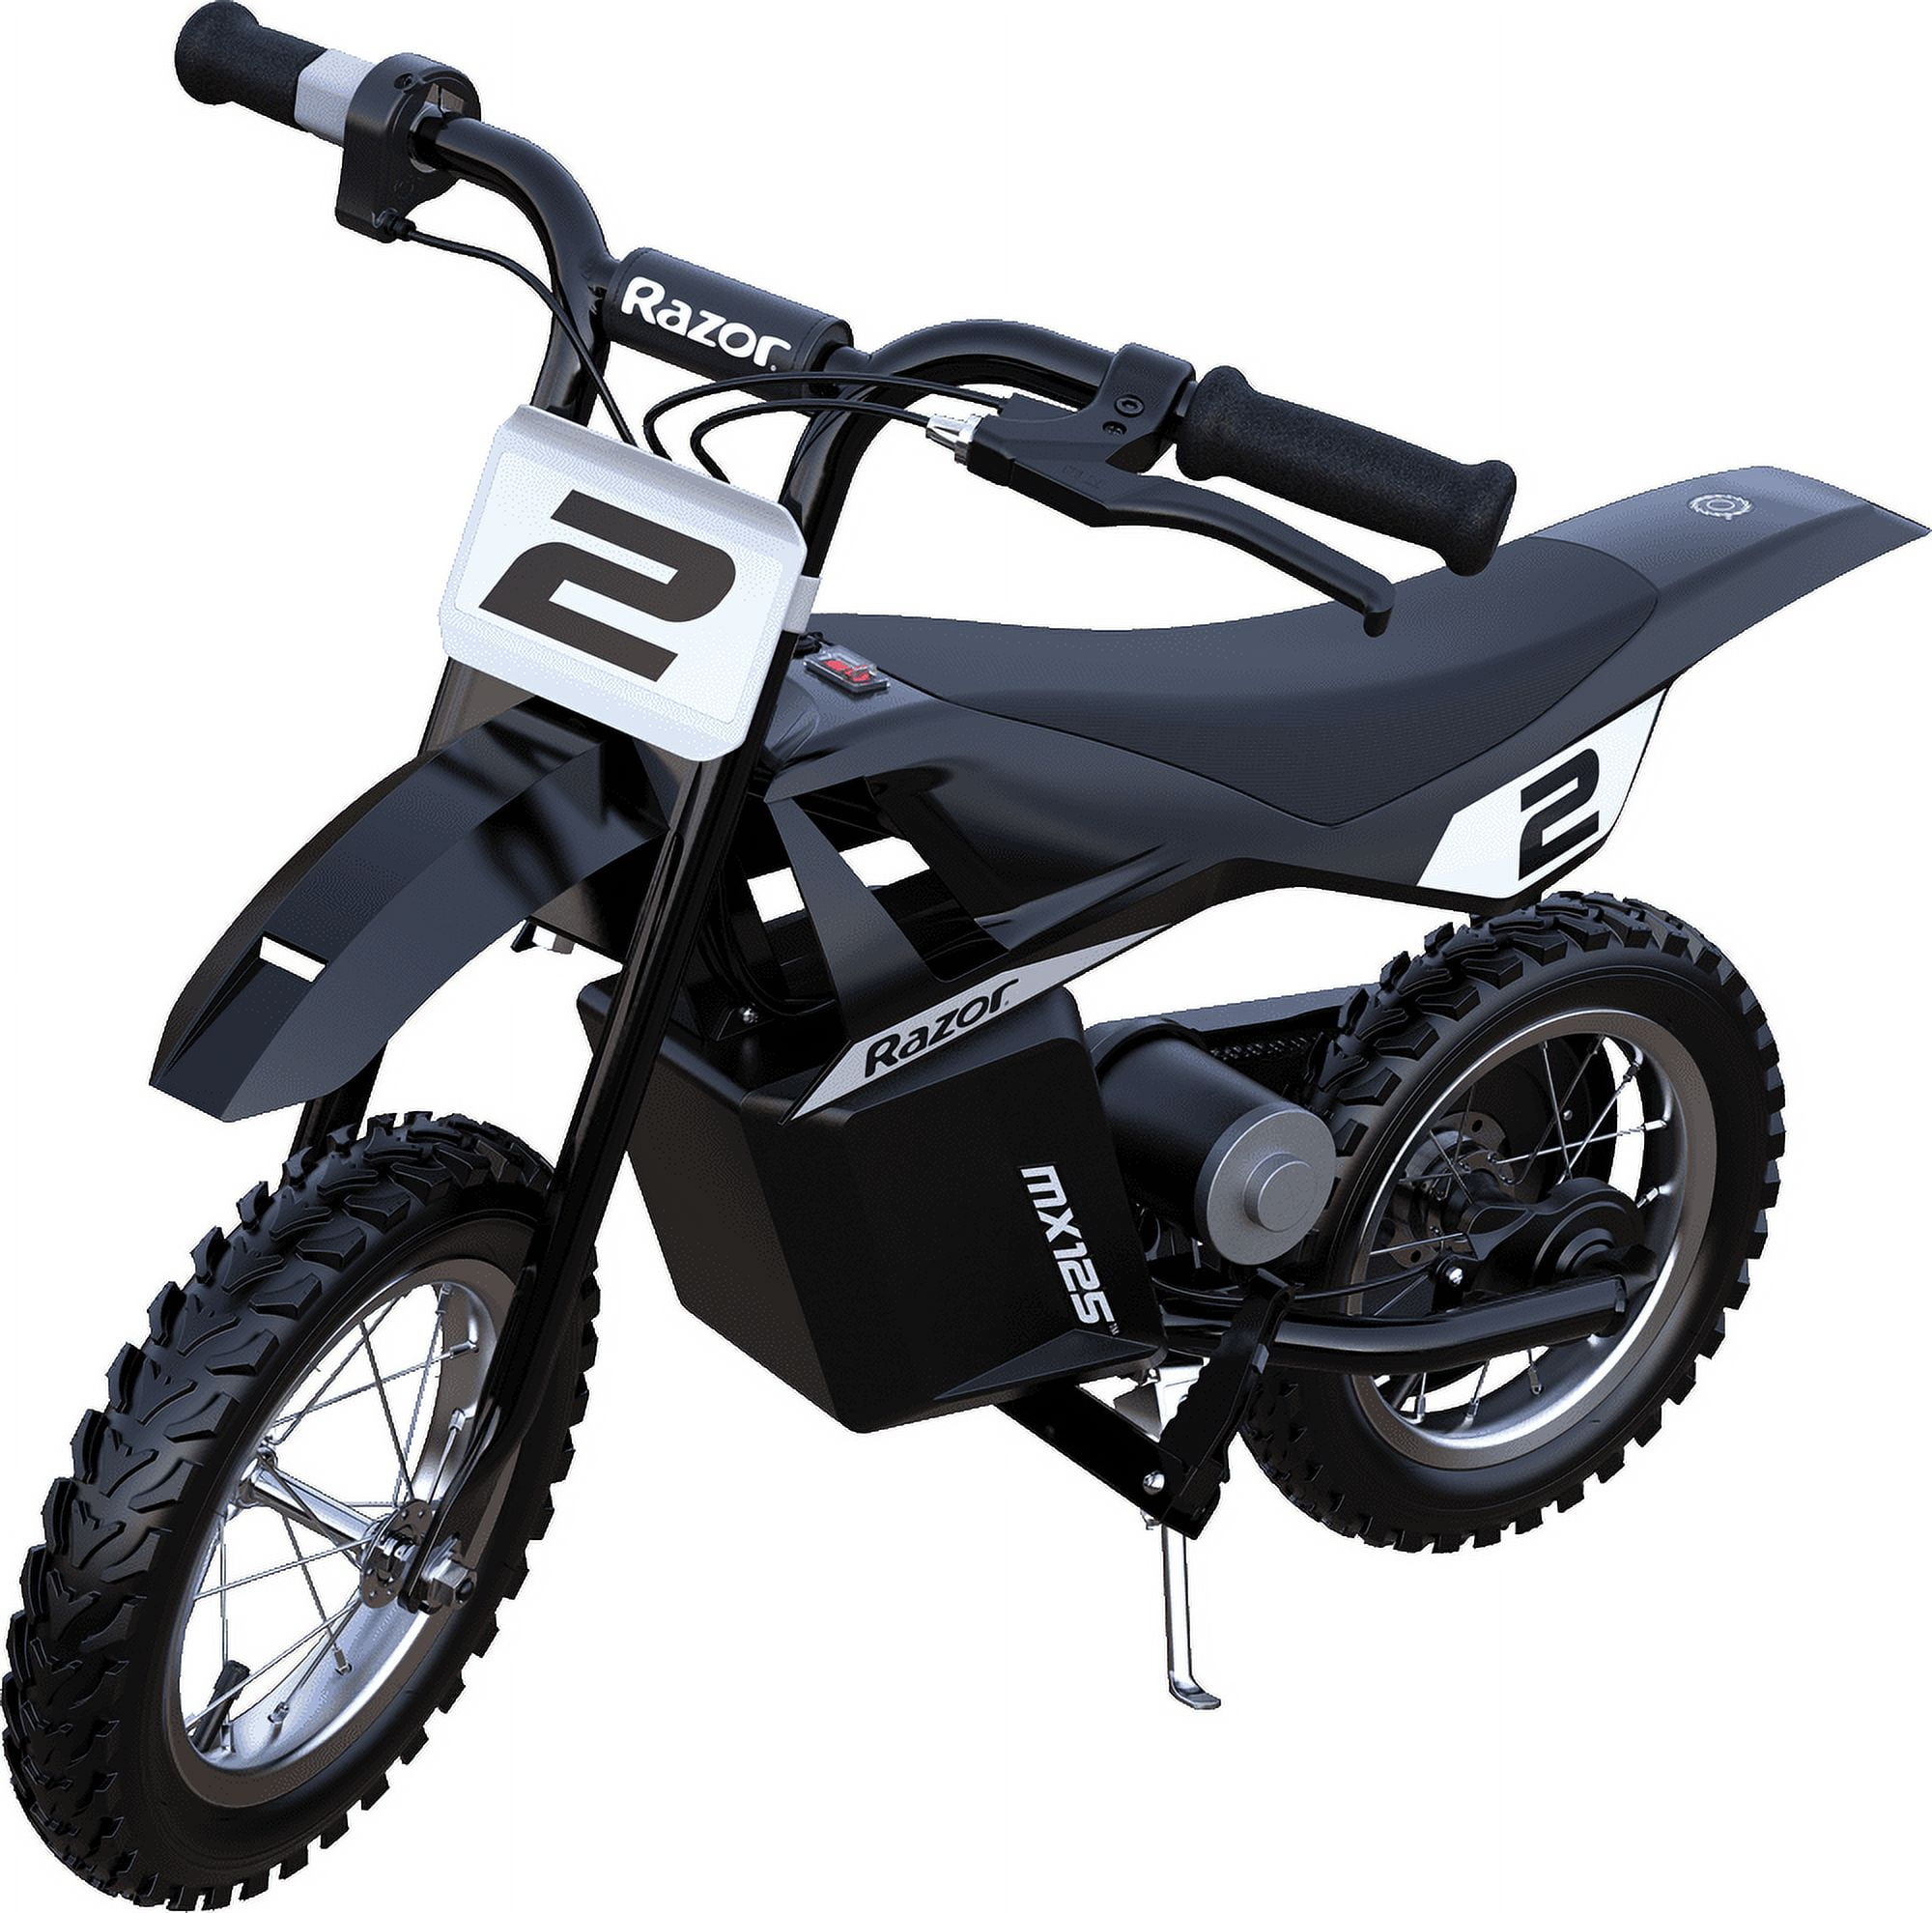 Razor Miniature Dirt Rocket MX125 Electric-Powered Dirt Bike - Black with  Decal Included, Recommended For Kids 7+ Between 40 and 80 lbs